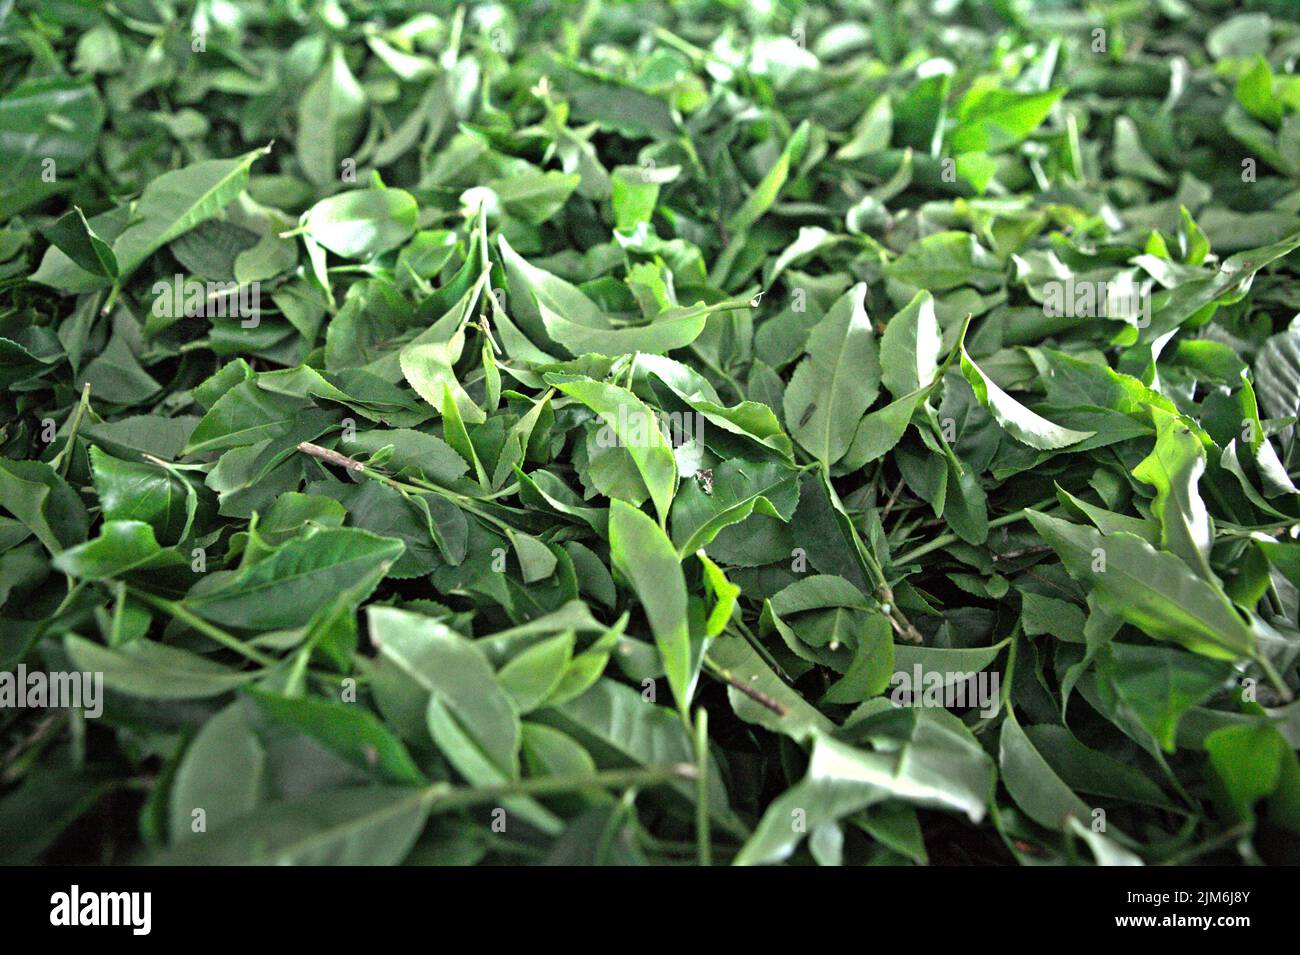 Harvested tea leaves that are ready for drying process at Sabah tea factory, the processing plant for materials harvested from organic tea farm, a part of Sabah tea garden in Sabah, Malaysia. Stock Photo